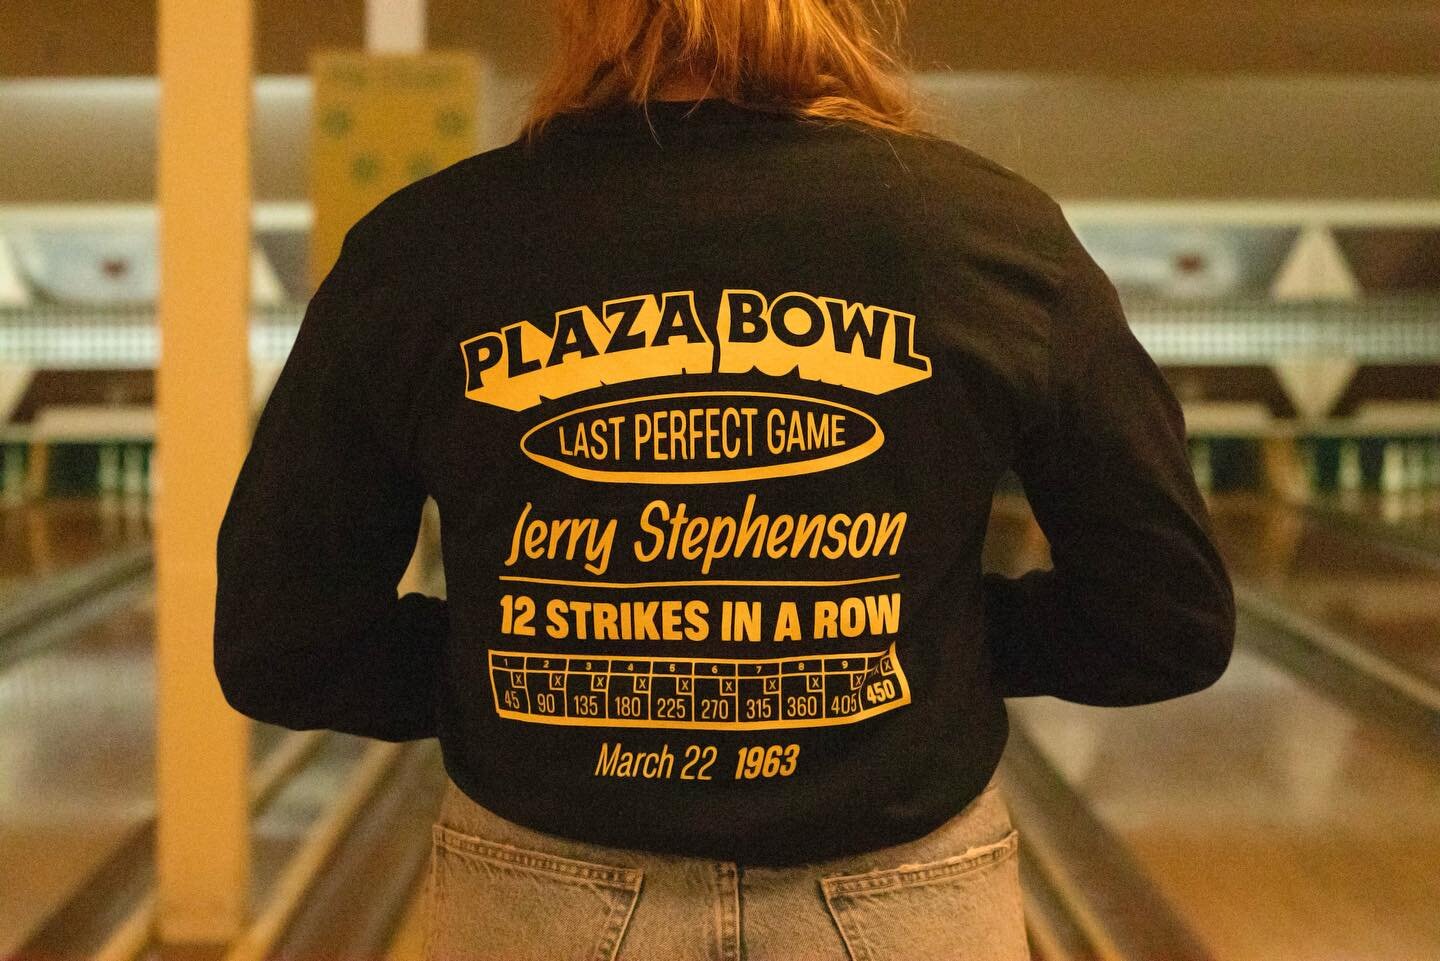 Jerry Shirt round 3 has arrived! 

Jerry&rsquo;s 1963 perfect game lives on as the last (and only) perfect game bowled on our lanes. 

A copy of the game scoresheet was graciously gifted to us from members of Jerry&rsquo;s family, and can now be foun